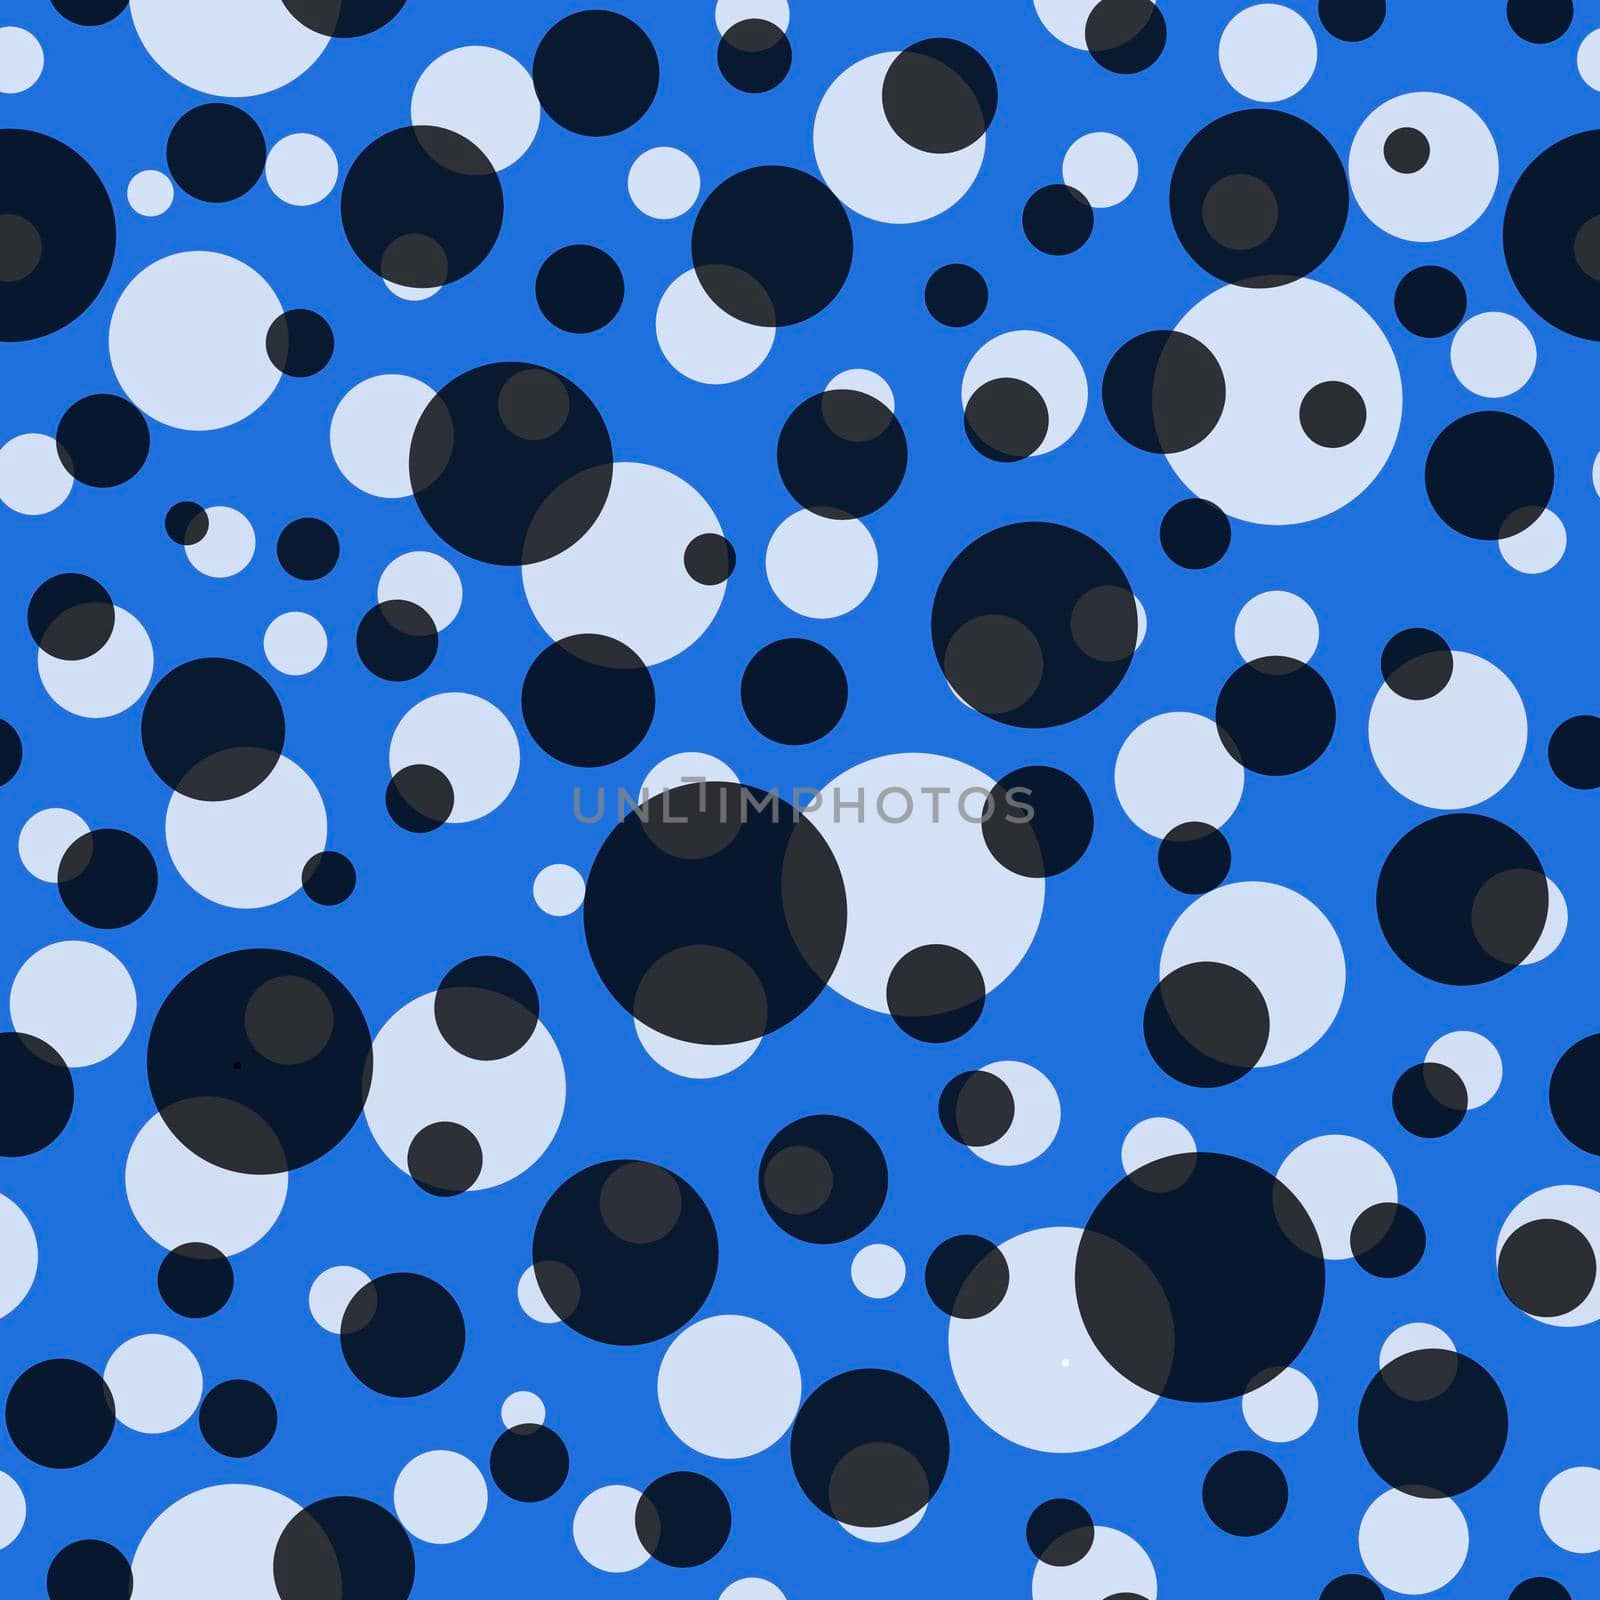 Abstract seamless pattern with colorful balls.Illustration of overlapping colorful dots pattern for background abstract.Polka dots ornament.Good for invitation,poster,card,flyer,banner,textile,fabric.